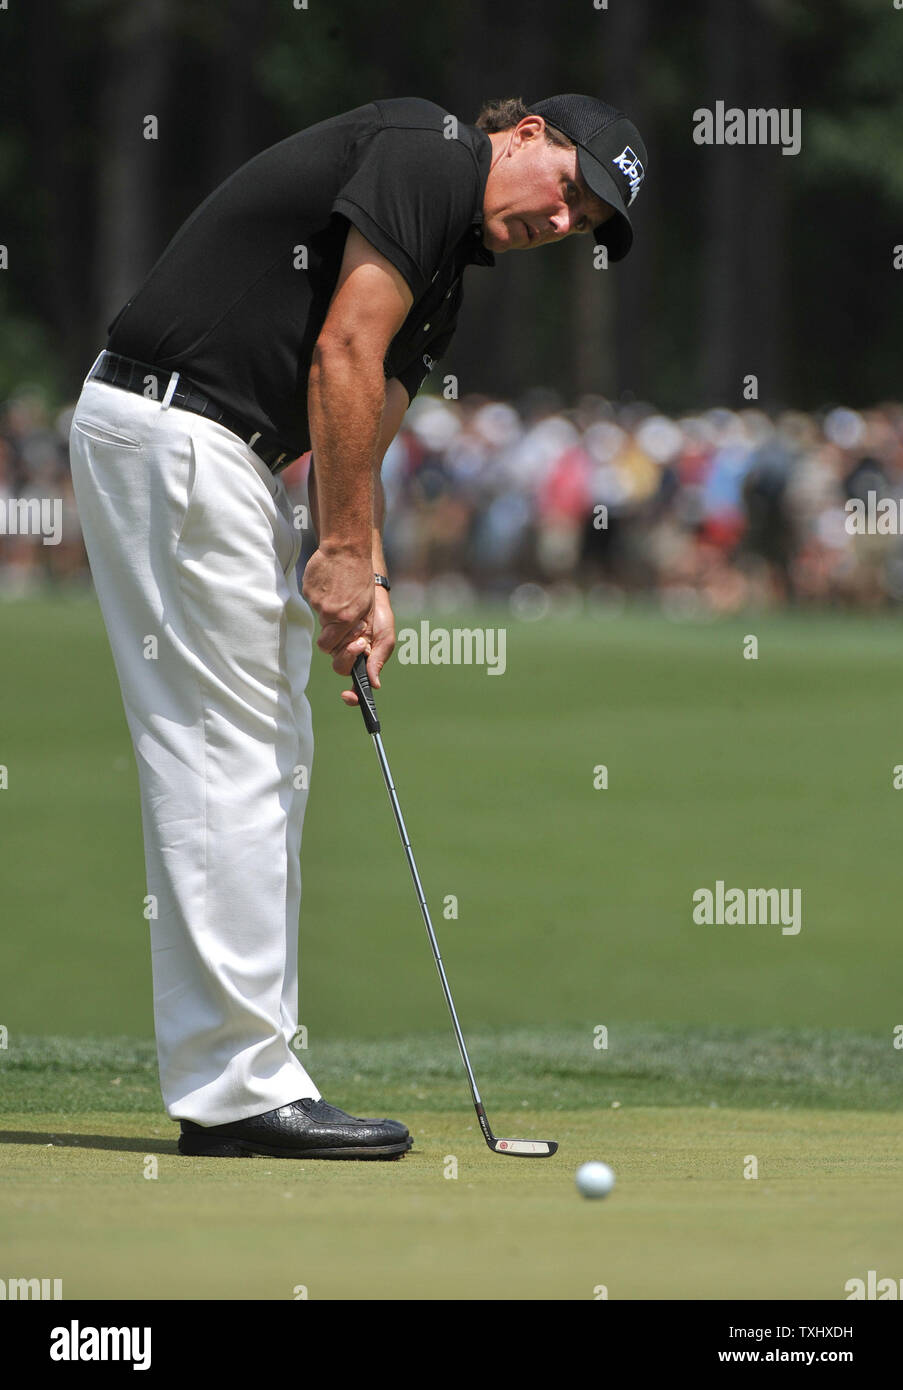 Phil Mickelson putts on the 1st green during the fourth round of the Quail Hollow Tournament in Charlotte, North Carolina on May 2, 2010.   UPI/Kevin Dietsch Stock Photo